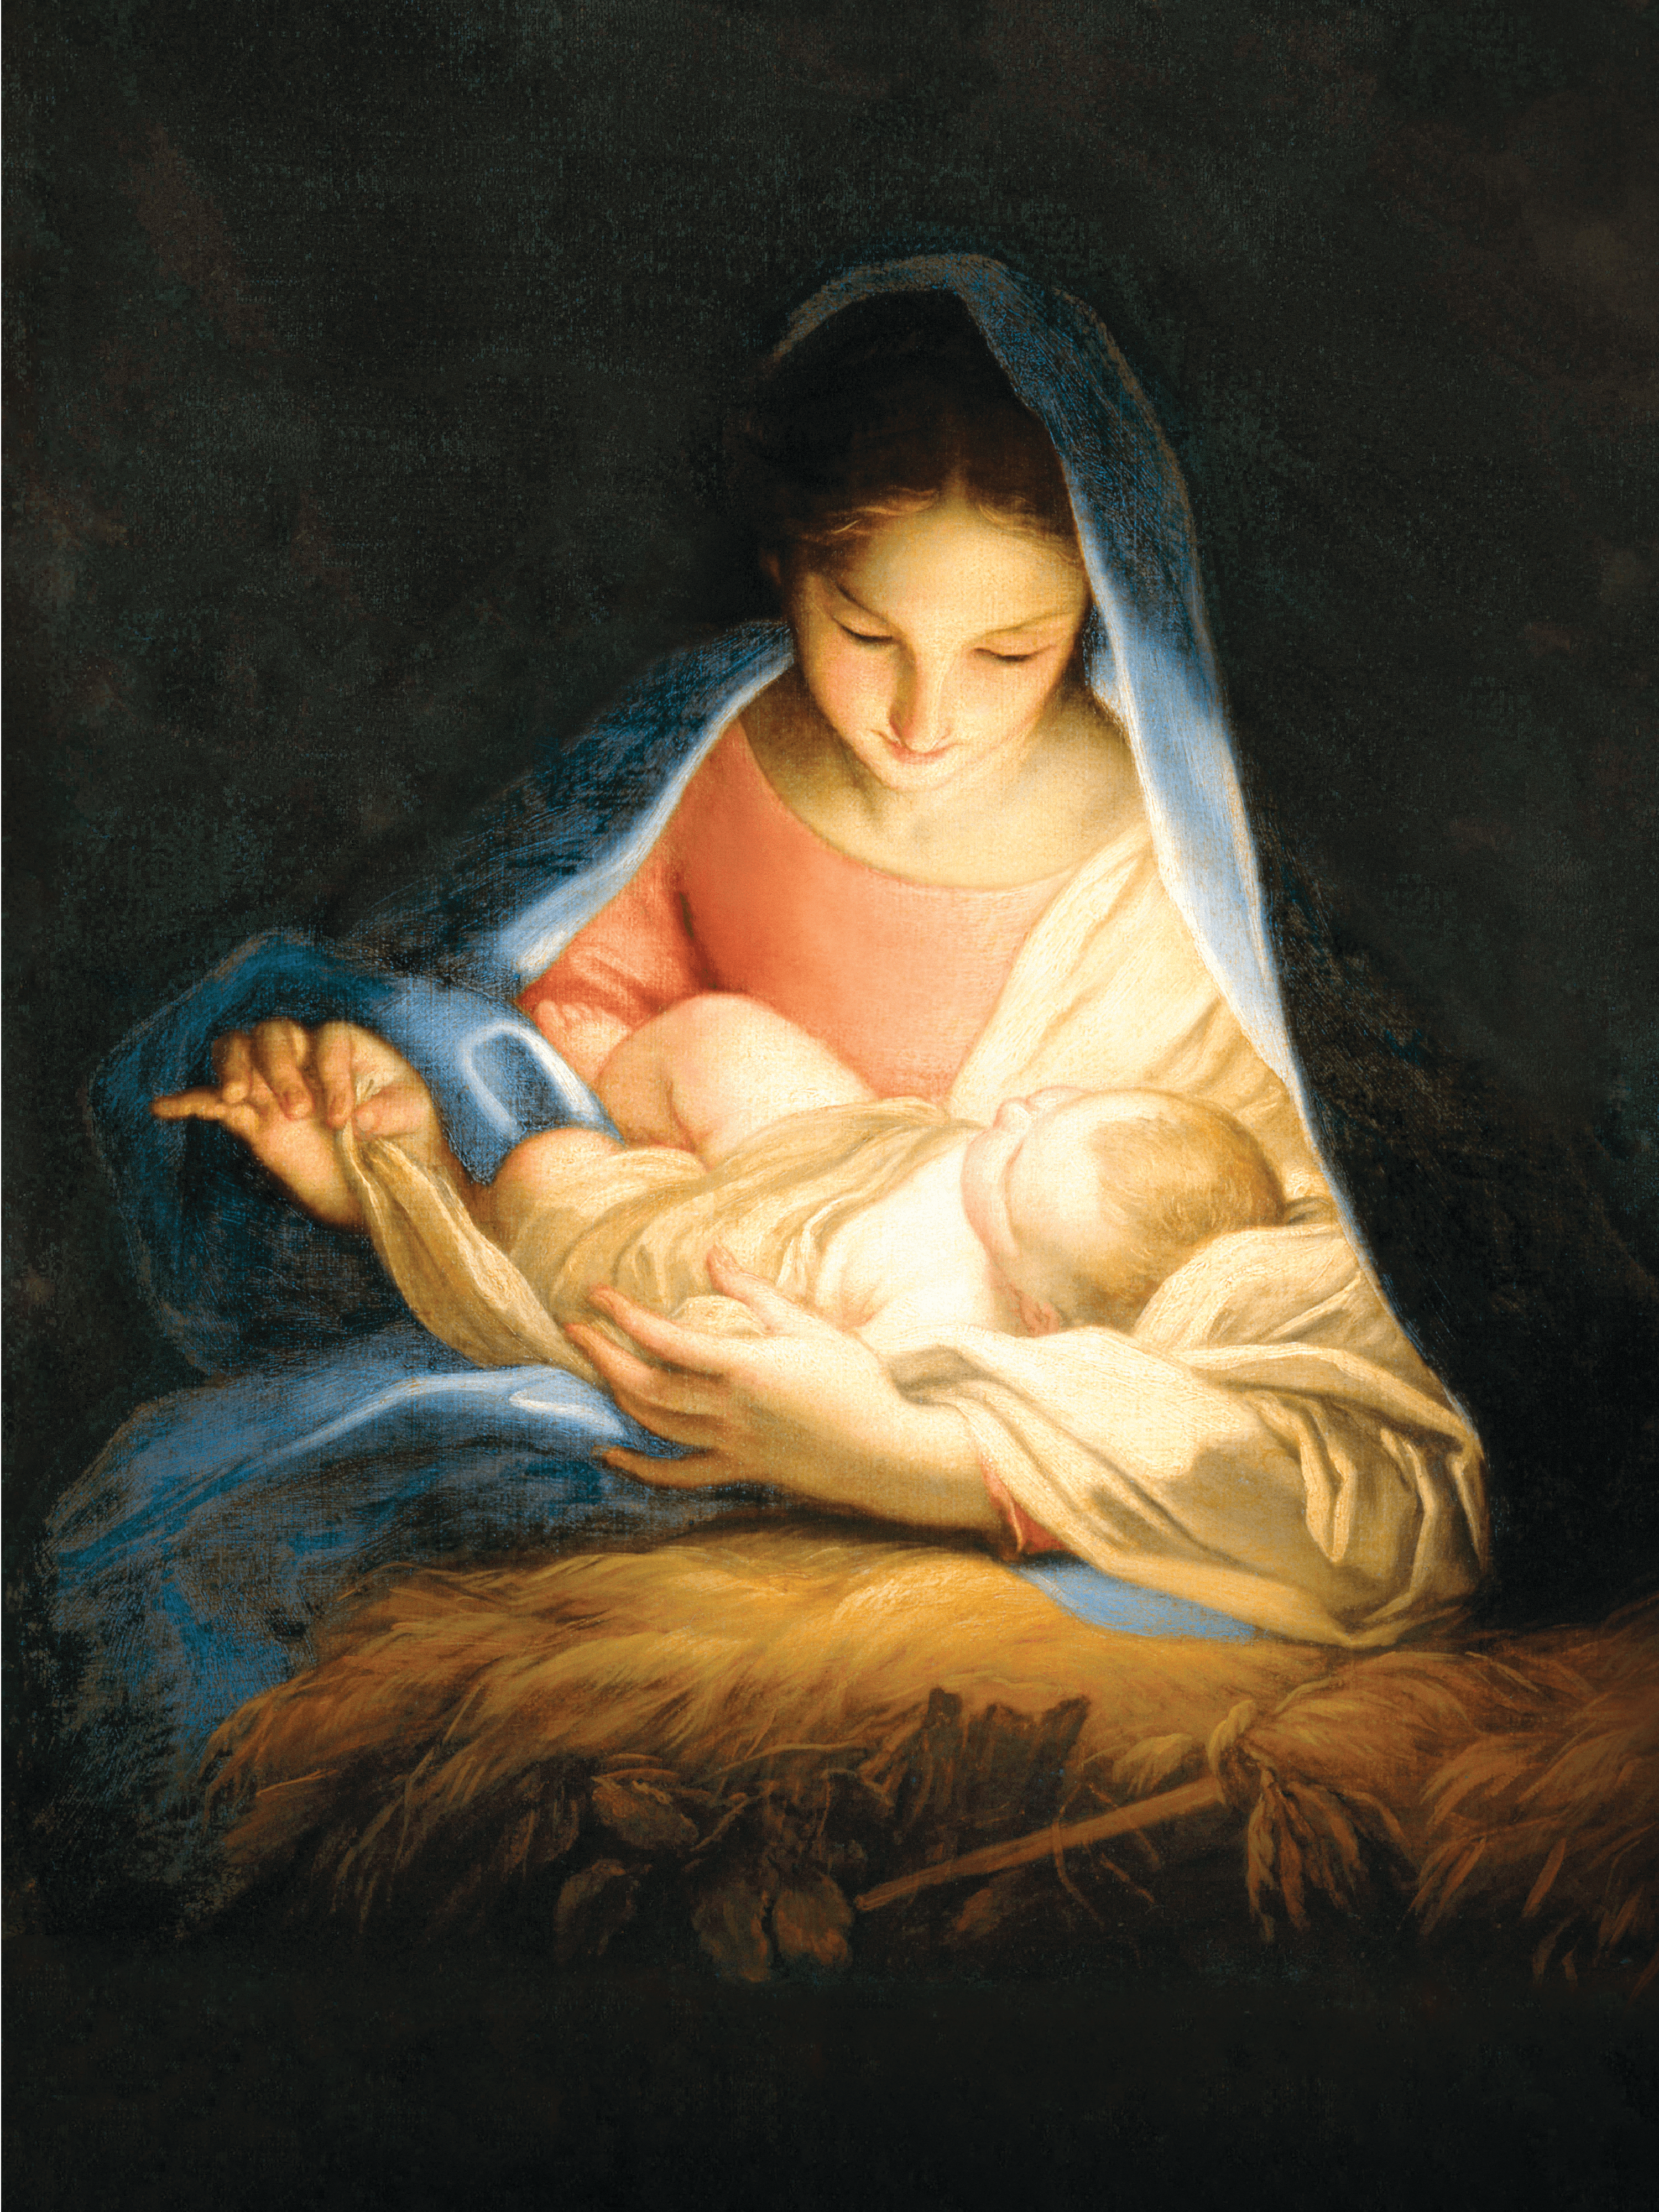 Painting of Mary, the mother of Christ, holding the infant Christ in her arms. They are sitting on a pile of hay.